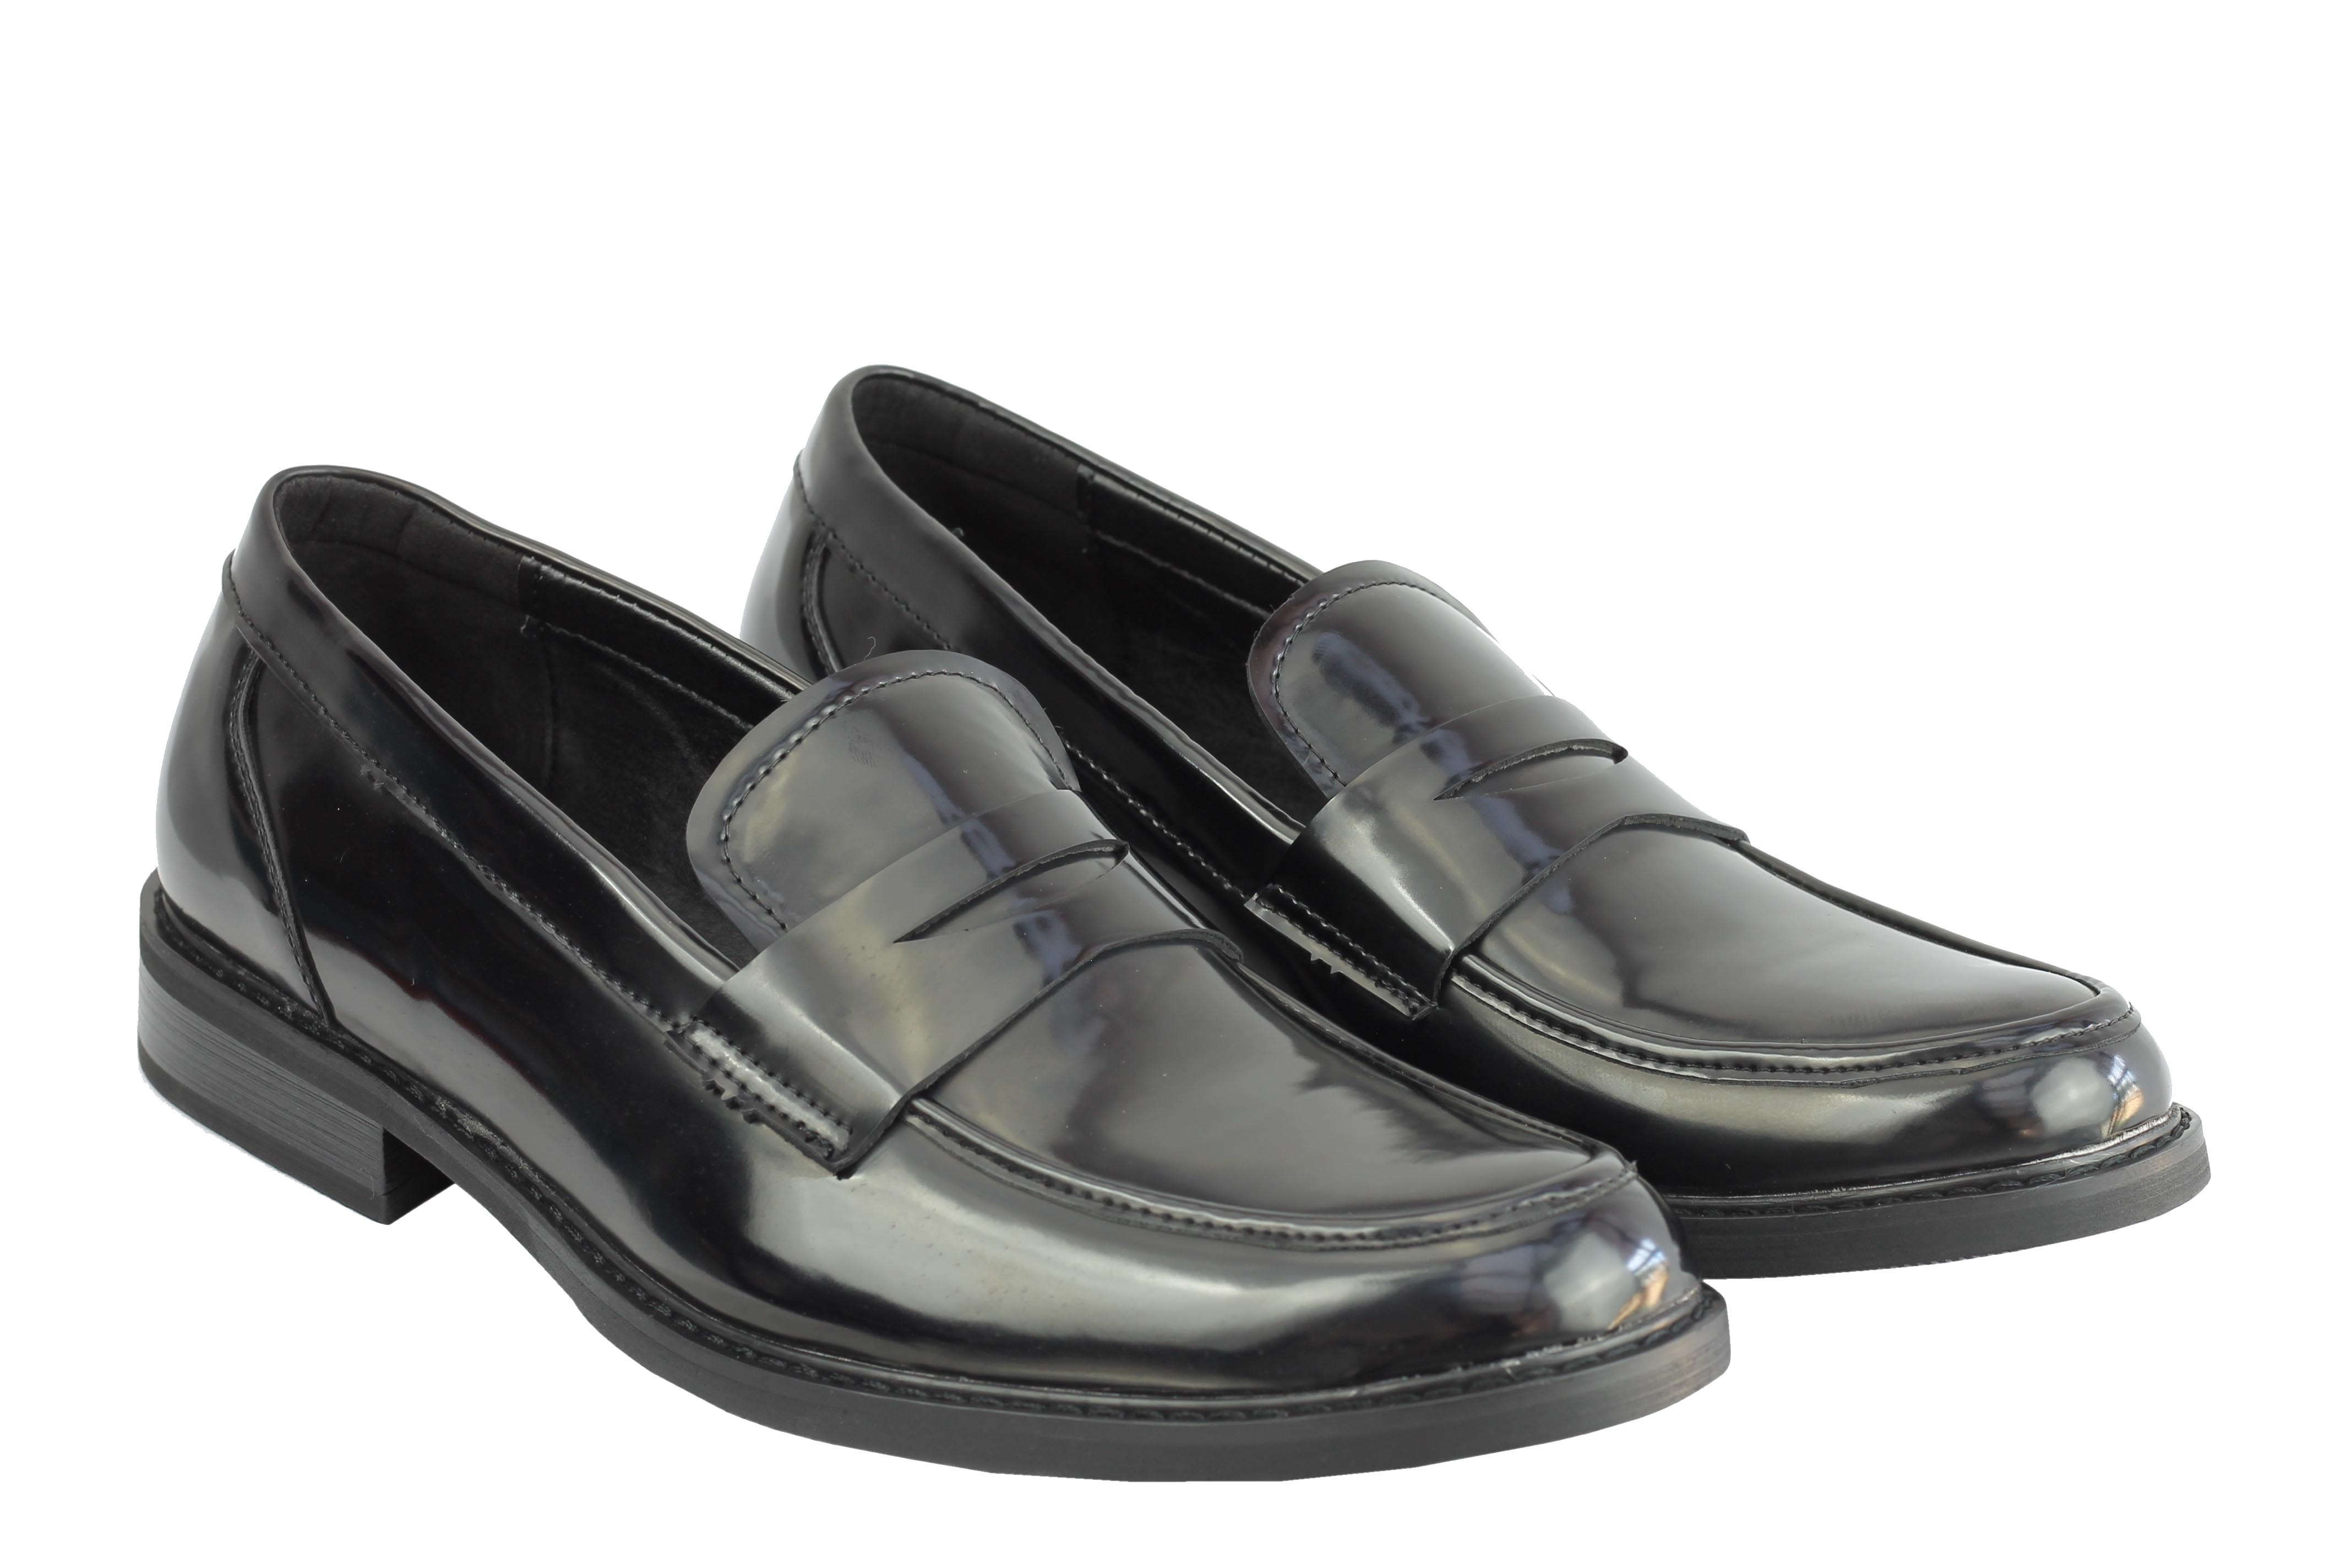 Mens Vintage Retro Polished Leather Lined Smart Casual Penny Loafers ...